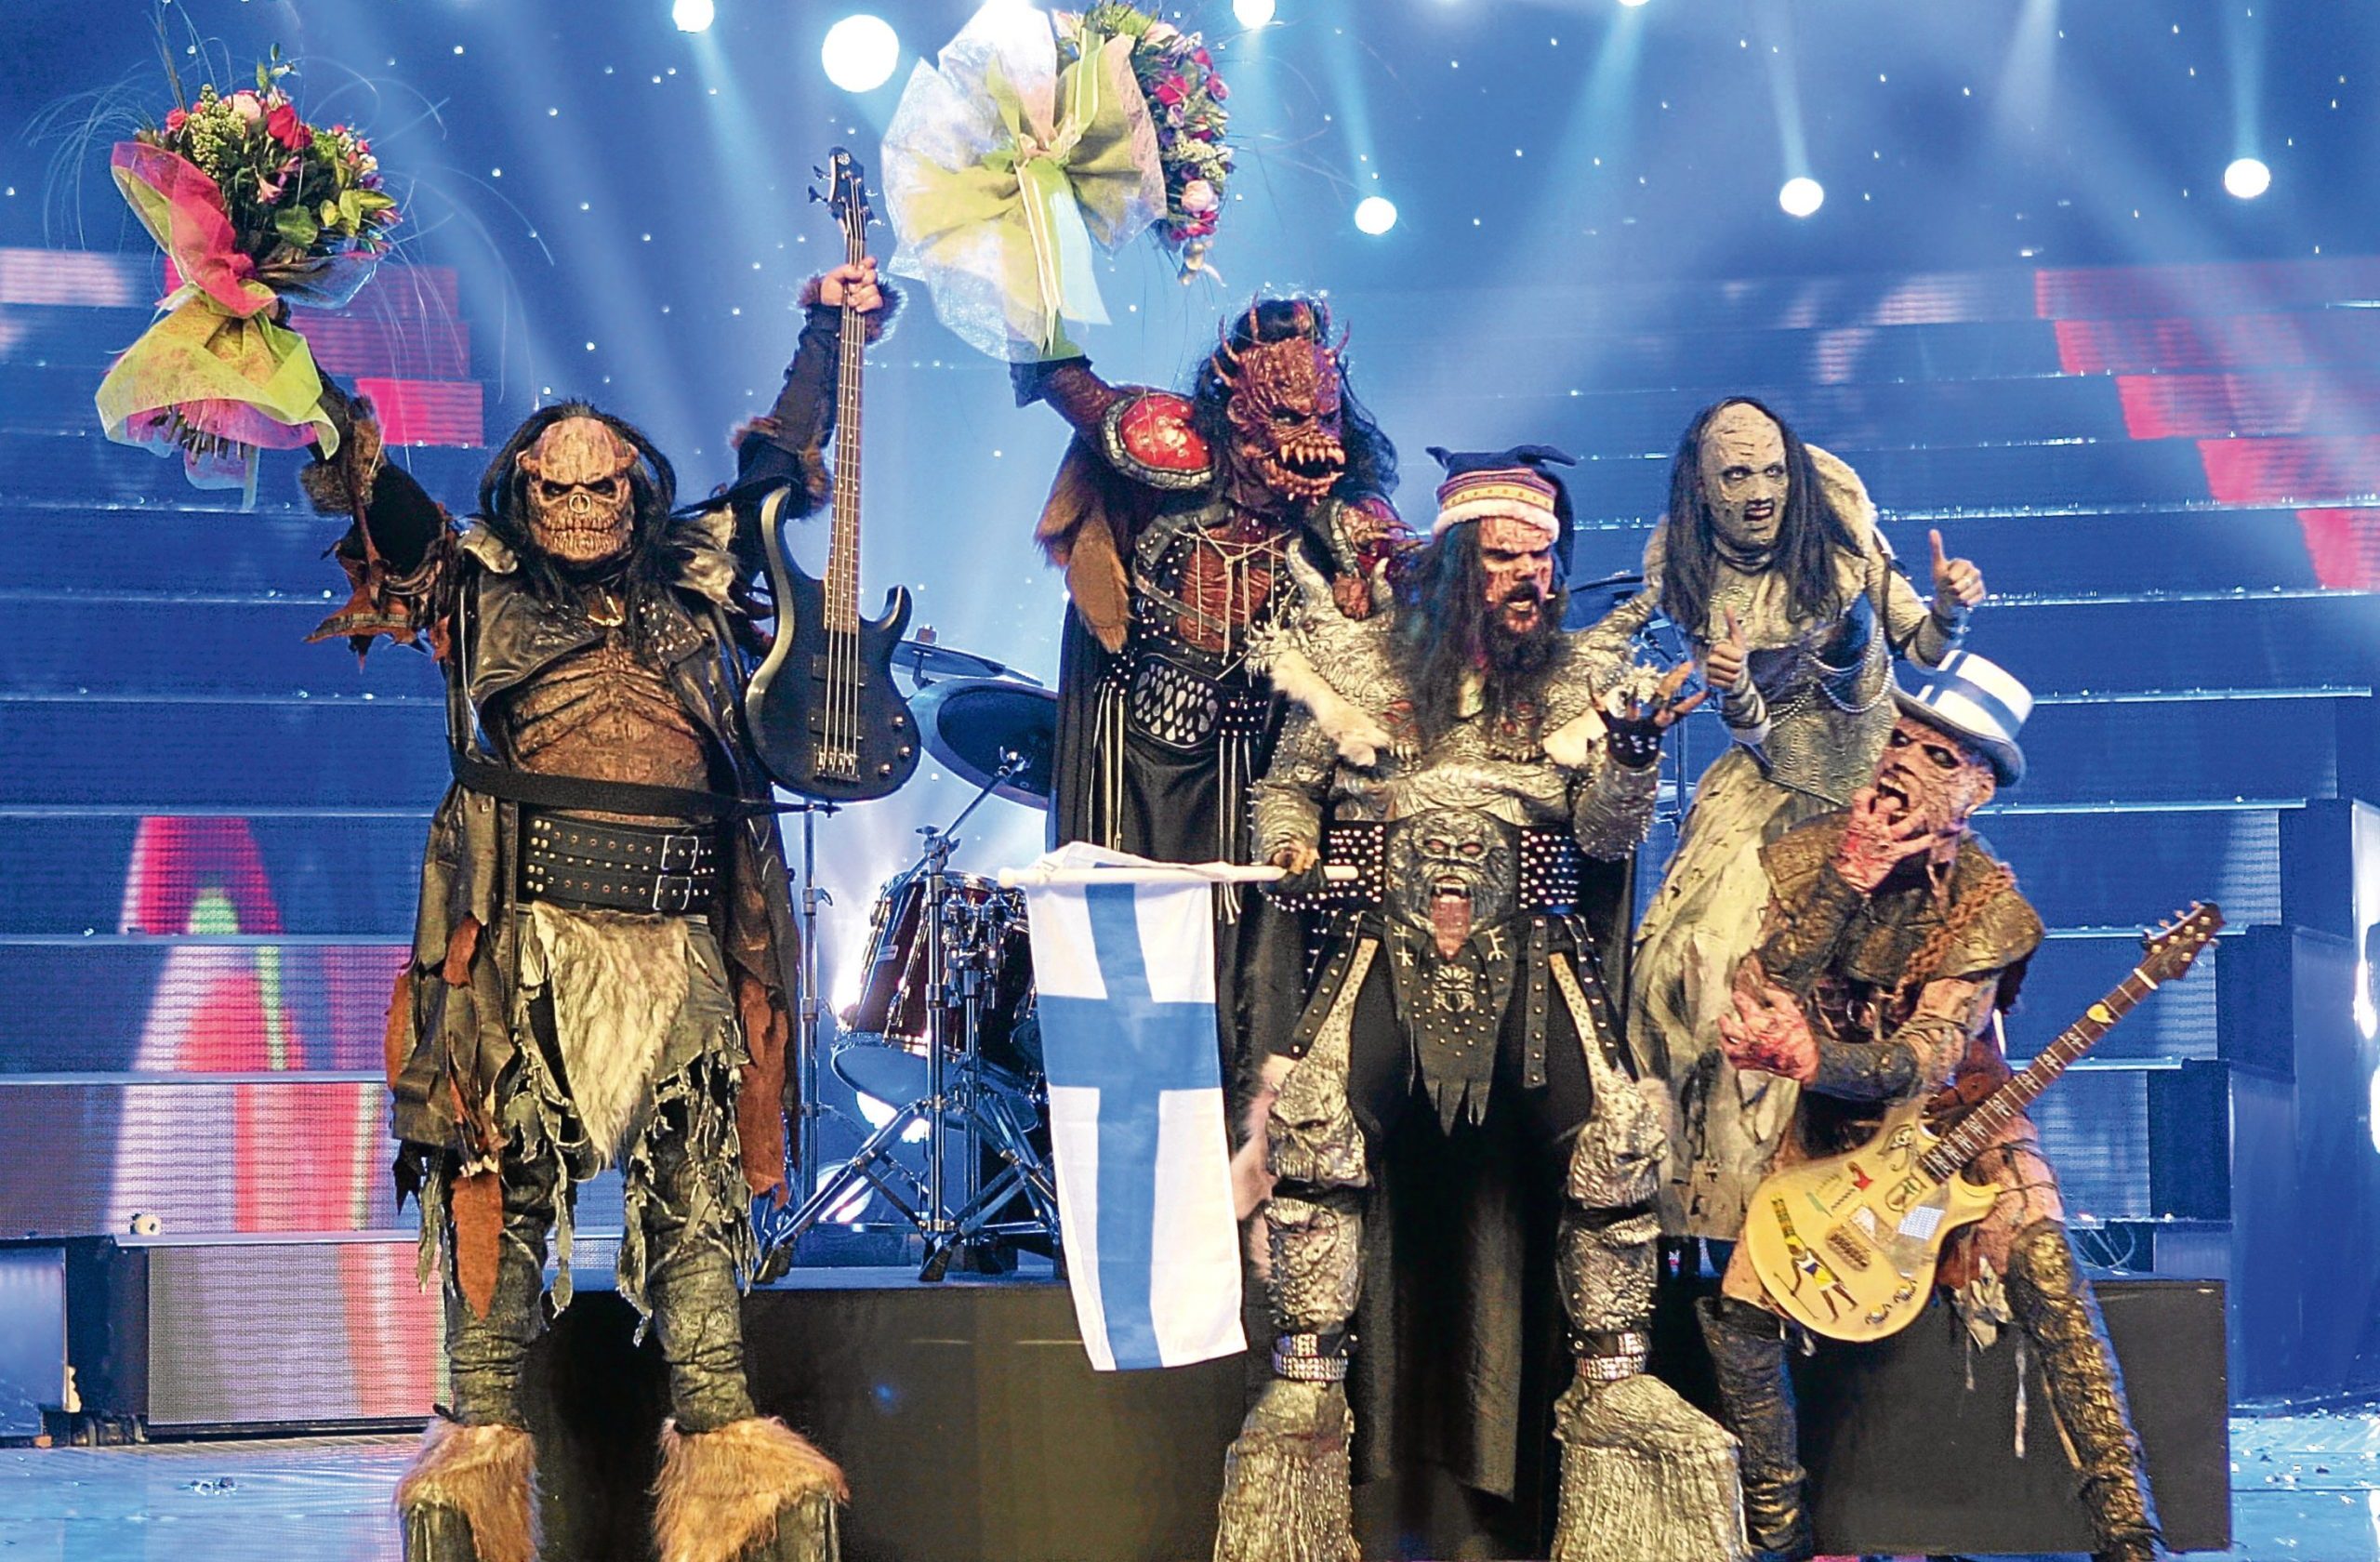 ATHENS - MAY 20: Monster rock band Lordi of Finland celebrate their victury at conclusion of the finals of the 2006 Eurovision Song Contest May 20, 2006 in Athens, Greece. (Photo by Sean Gallup/Getty Images)